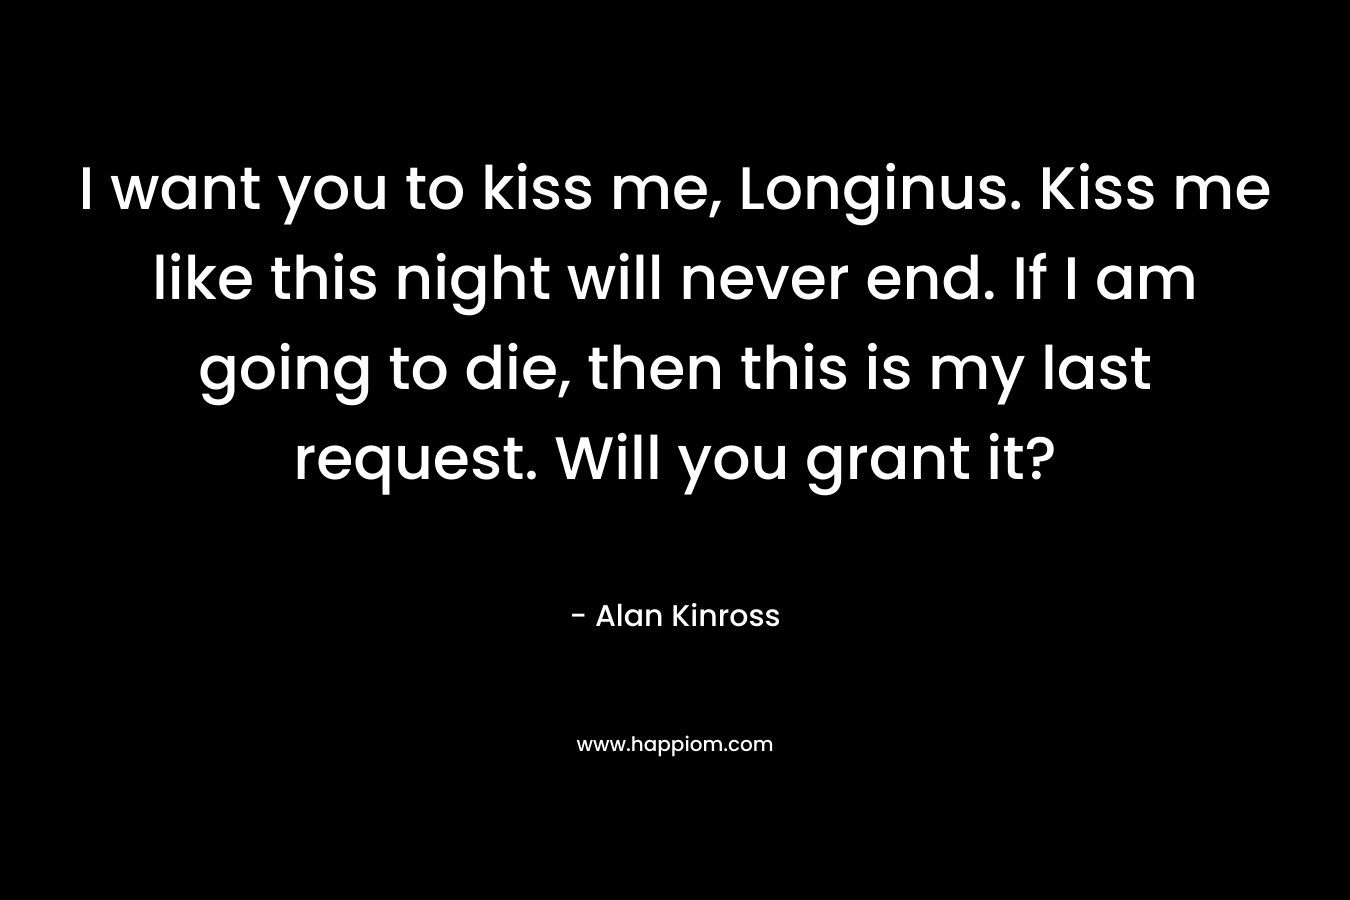 I want you to kiss me, Longinus. Kiss me like this night will never end. If I am going to die, then this is my last request. Will you grant it? – Alan Kinross